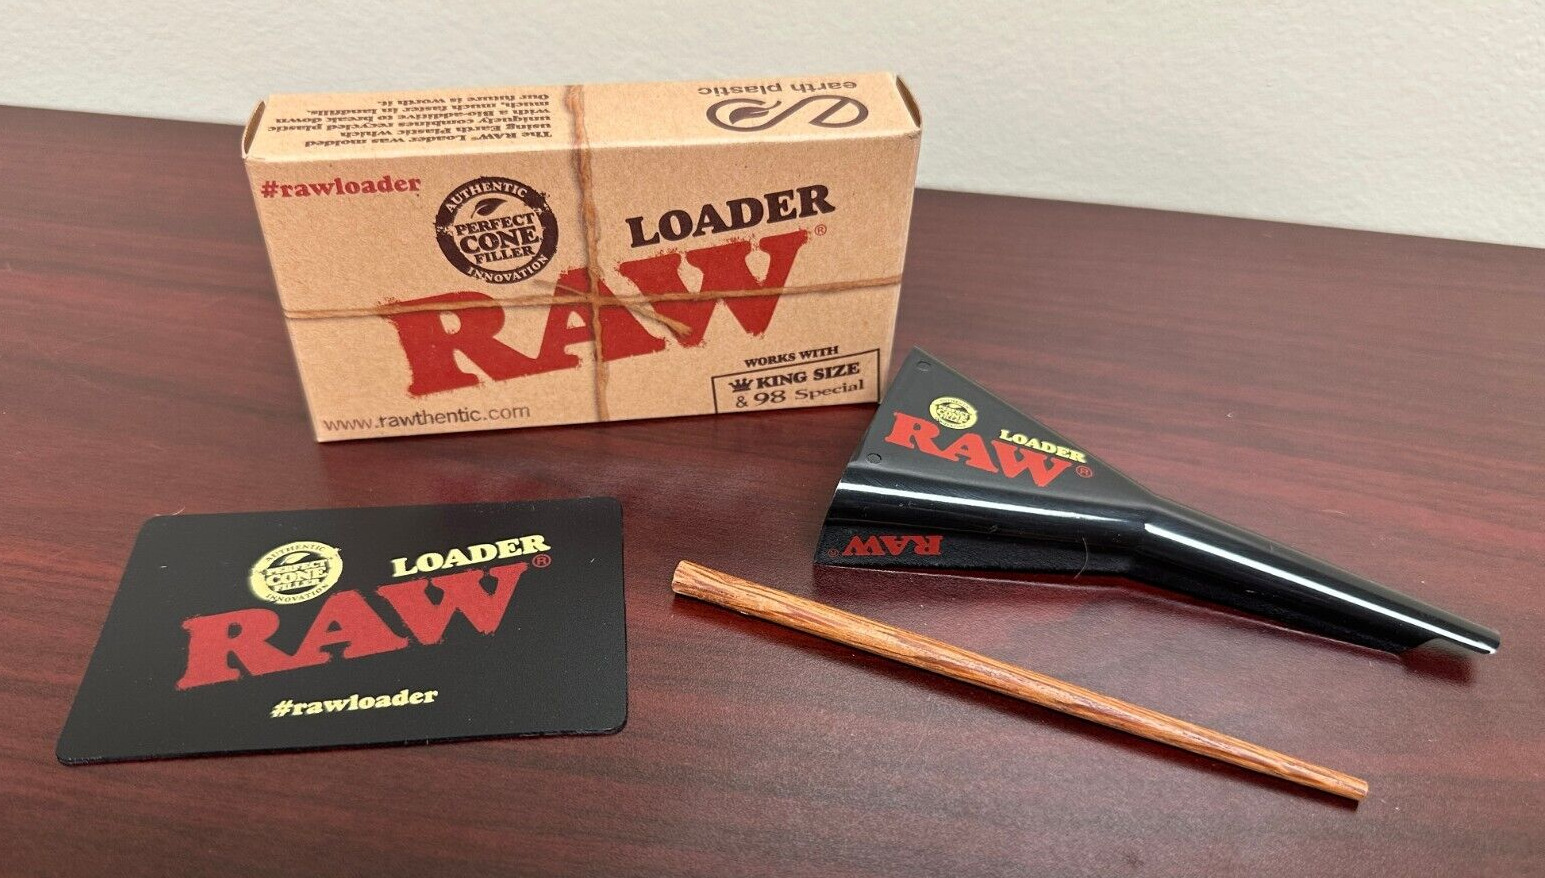 RAW King Size/98 Speical Loader for Cones with Stick and Scoop Card